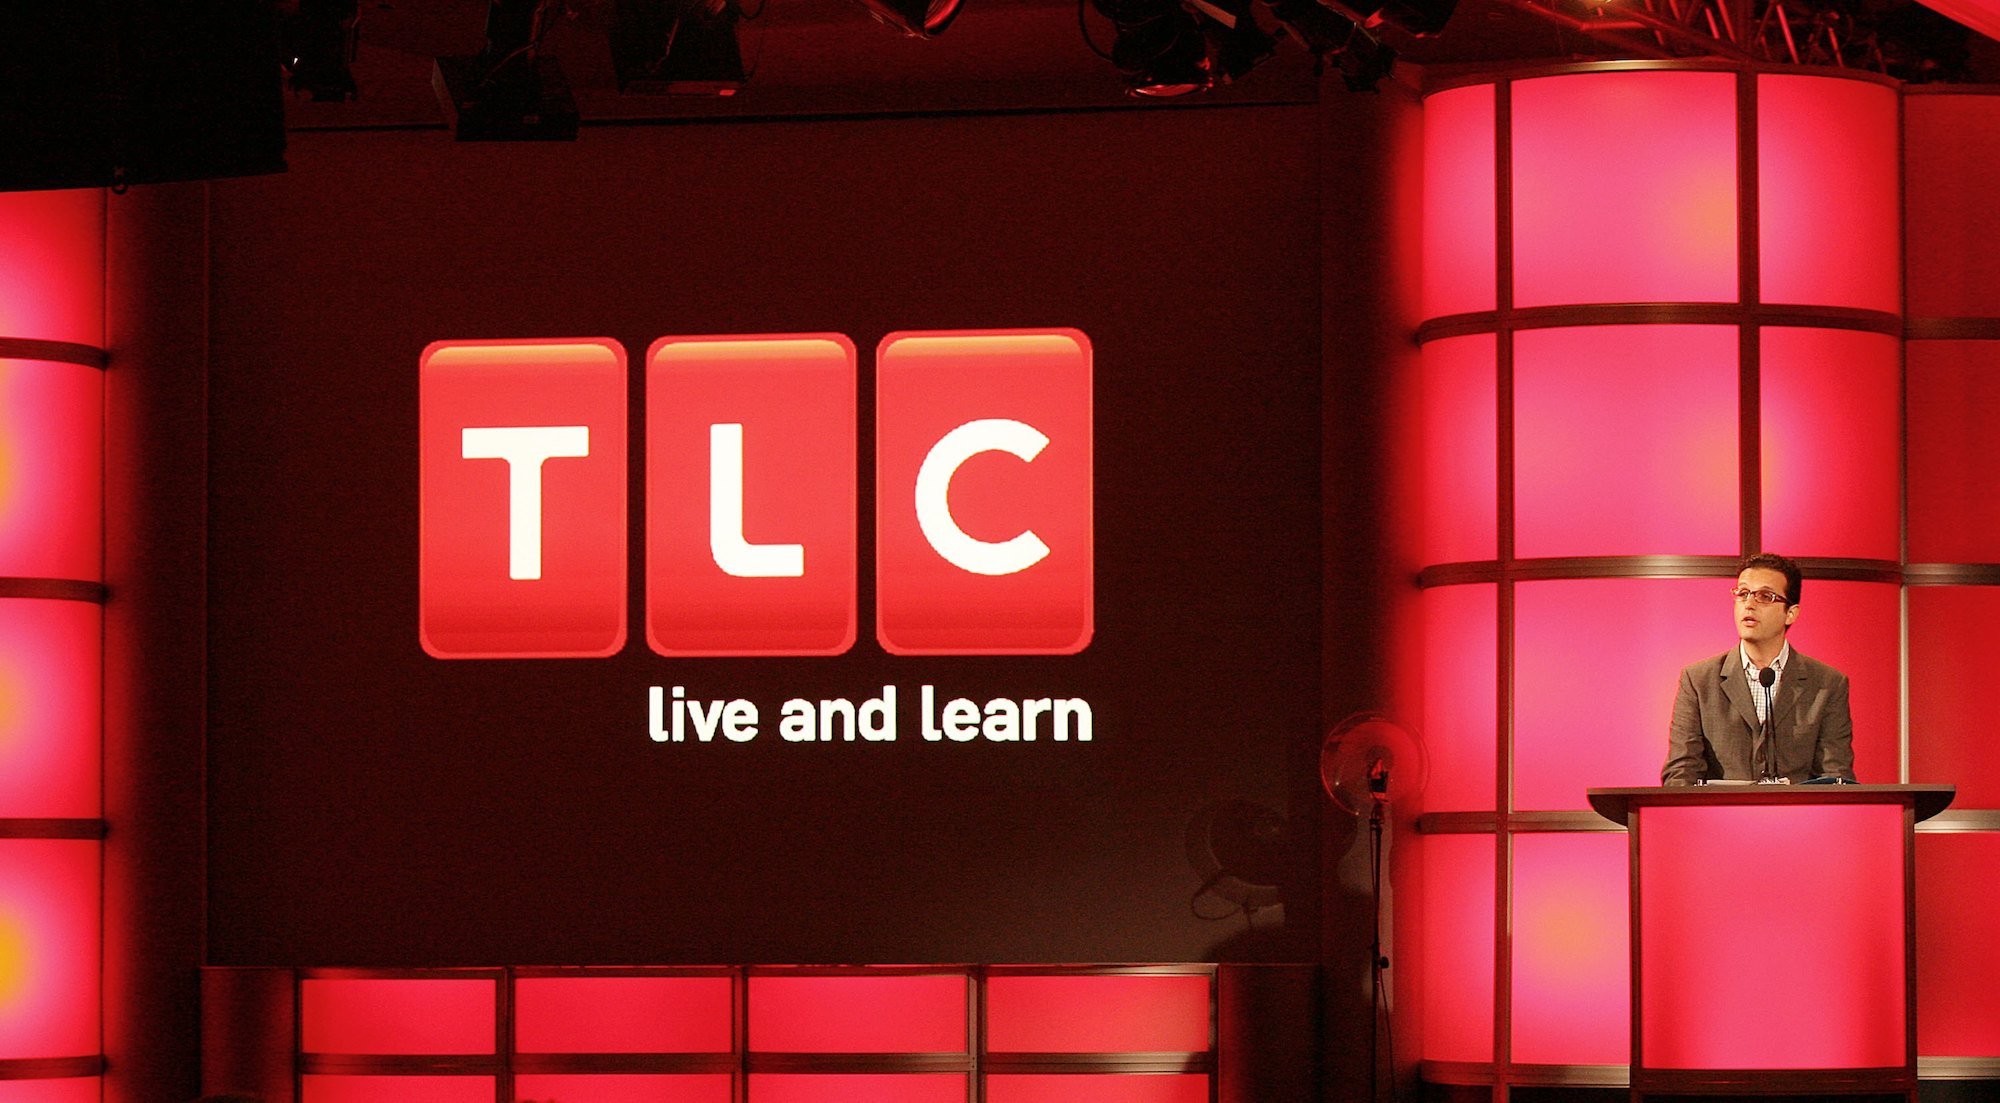 David Abraham speaks at a podium in front of the TLC logo